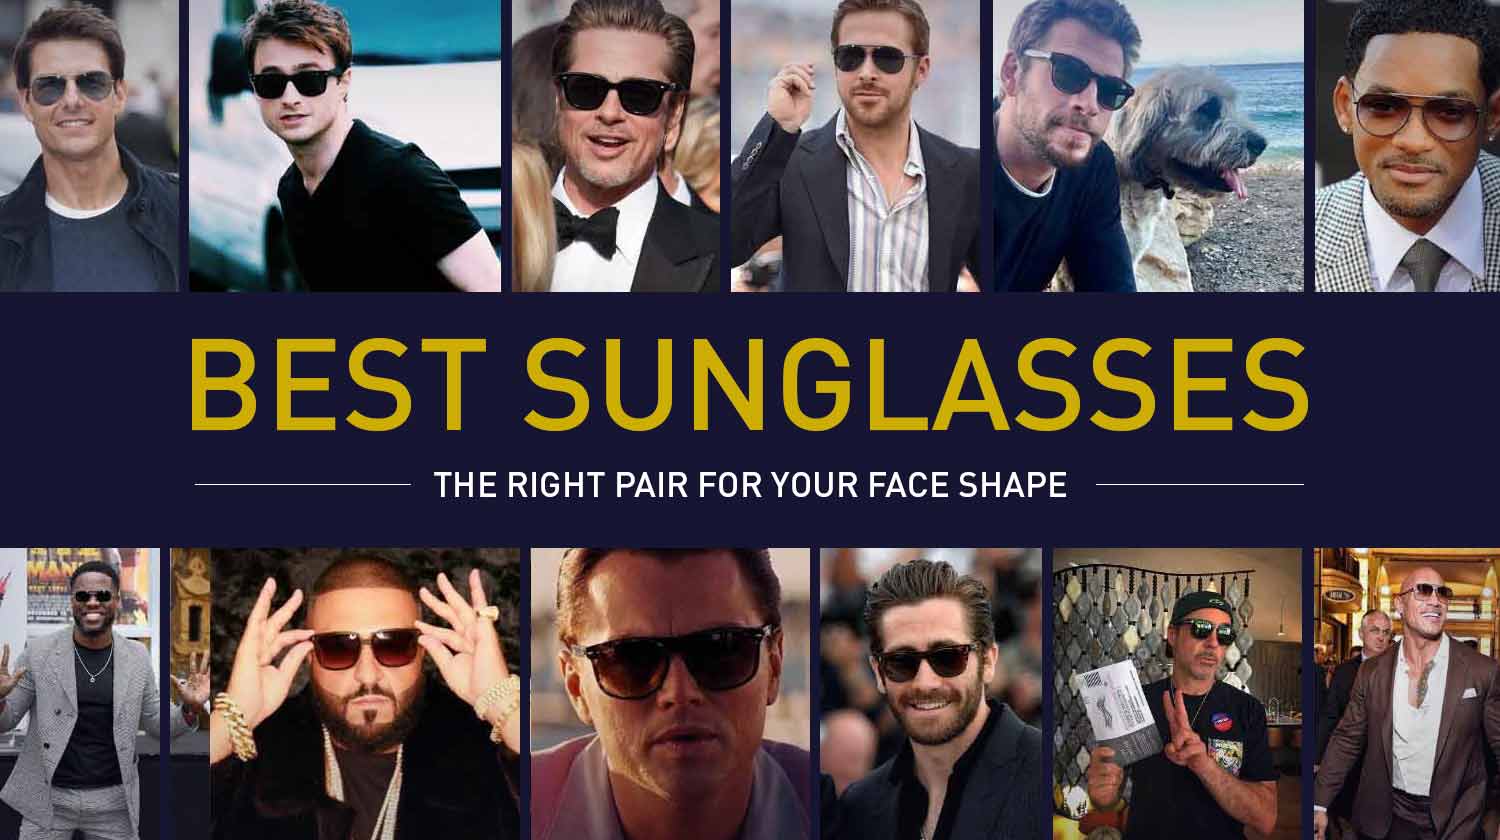 How to Choose the Best Sunglasses for Your Face Shape (2020 Picks) | GENTLEMAN WITHIN